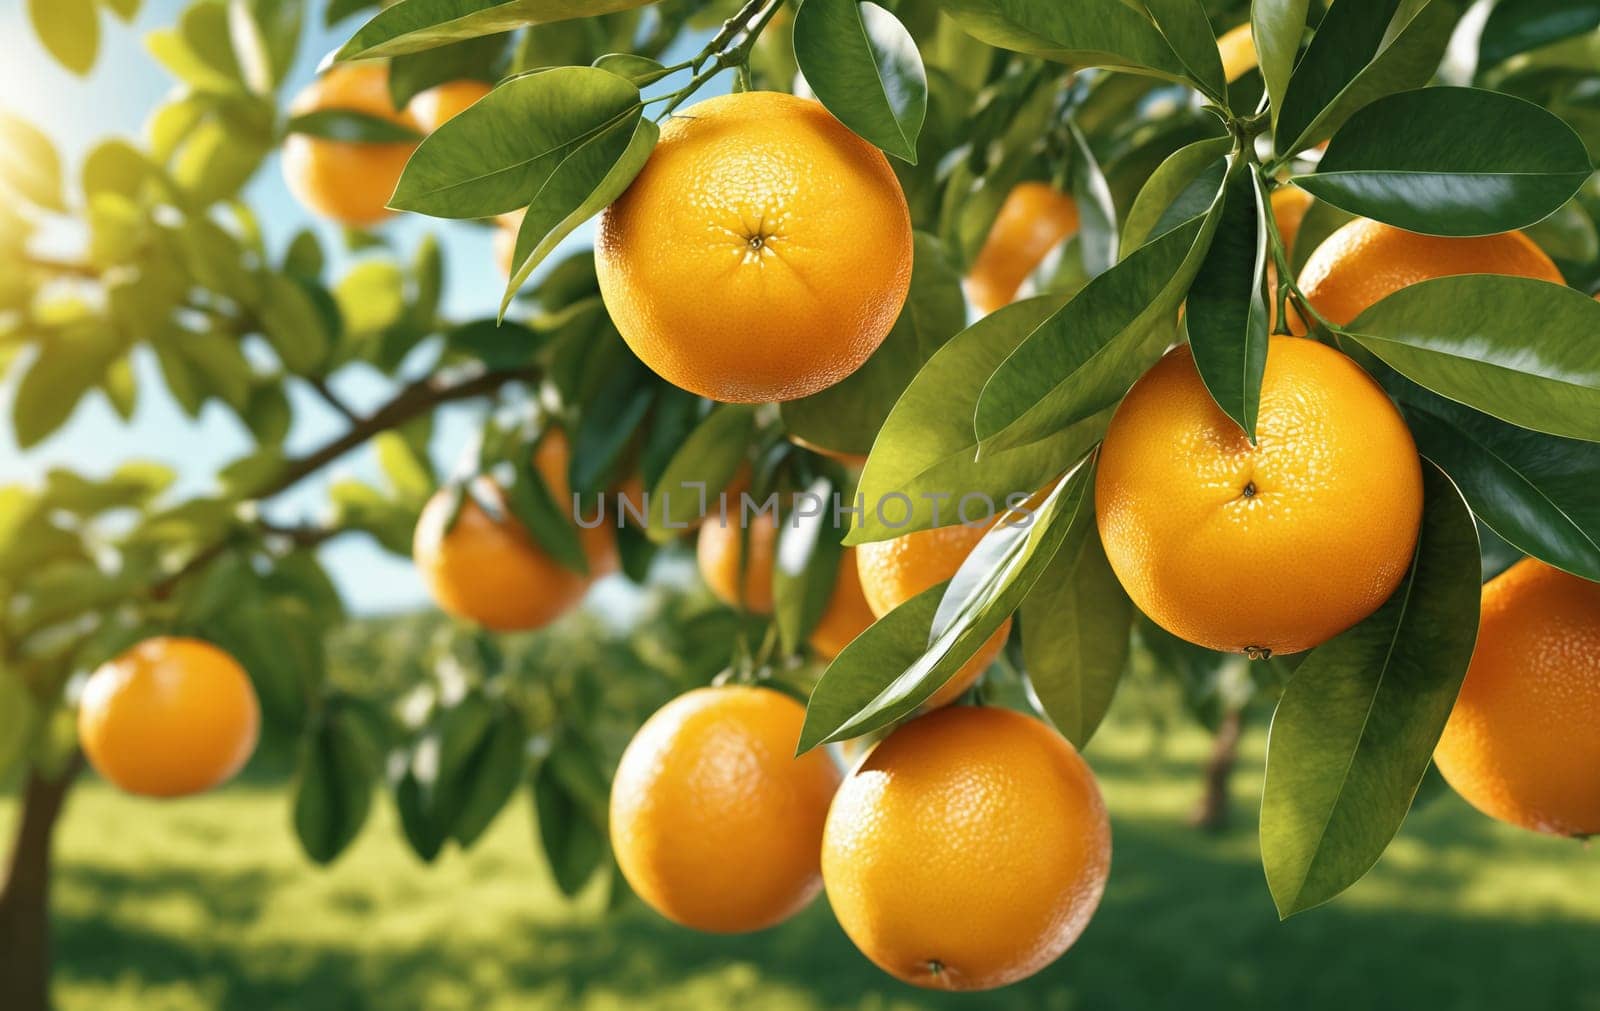 Ripe tangerines on a tree in an orchard. by Andre1ns